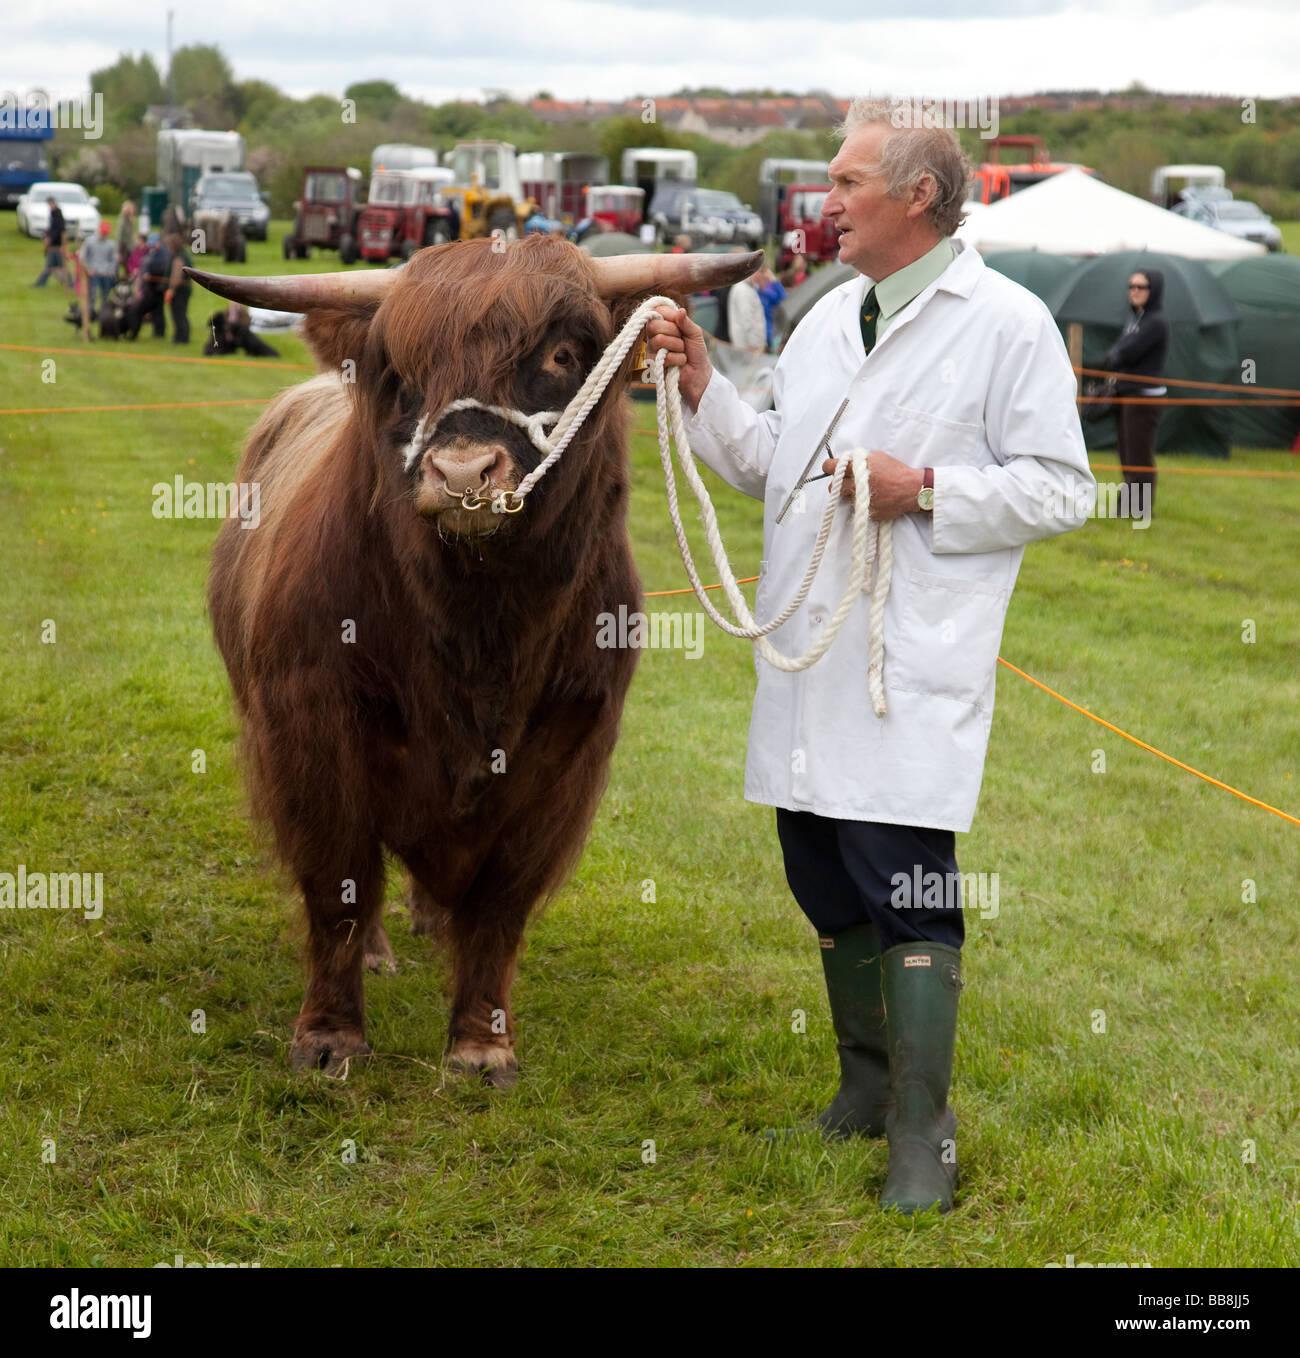 Highland bull being shown by a farmer at Dalry cattle show, North Ayrshire, Scotland Stock Photo